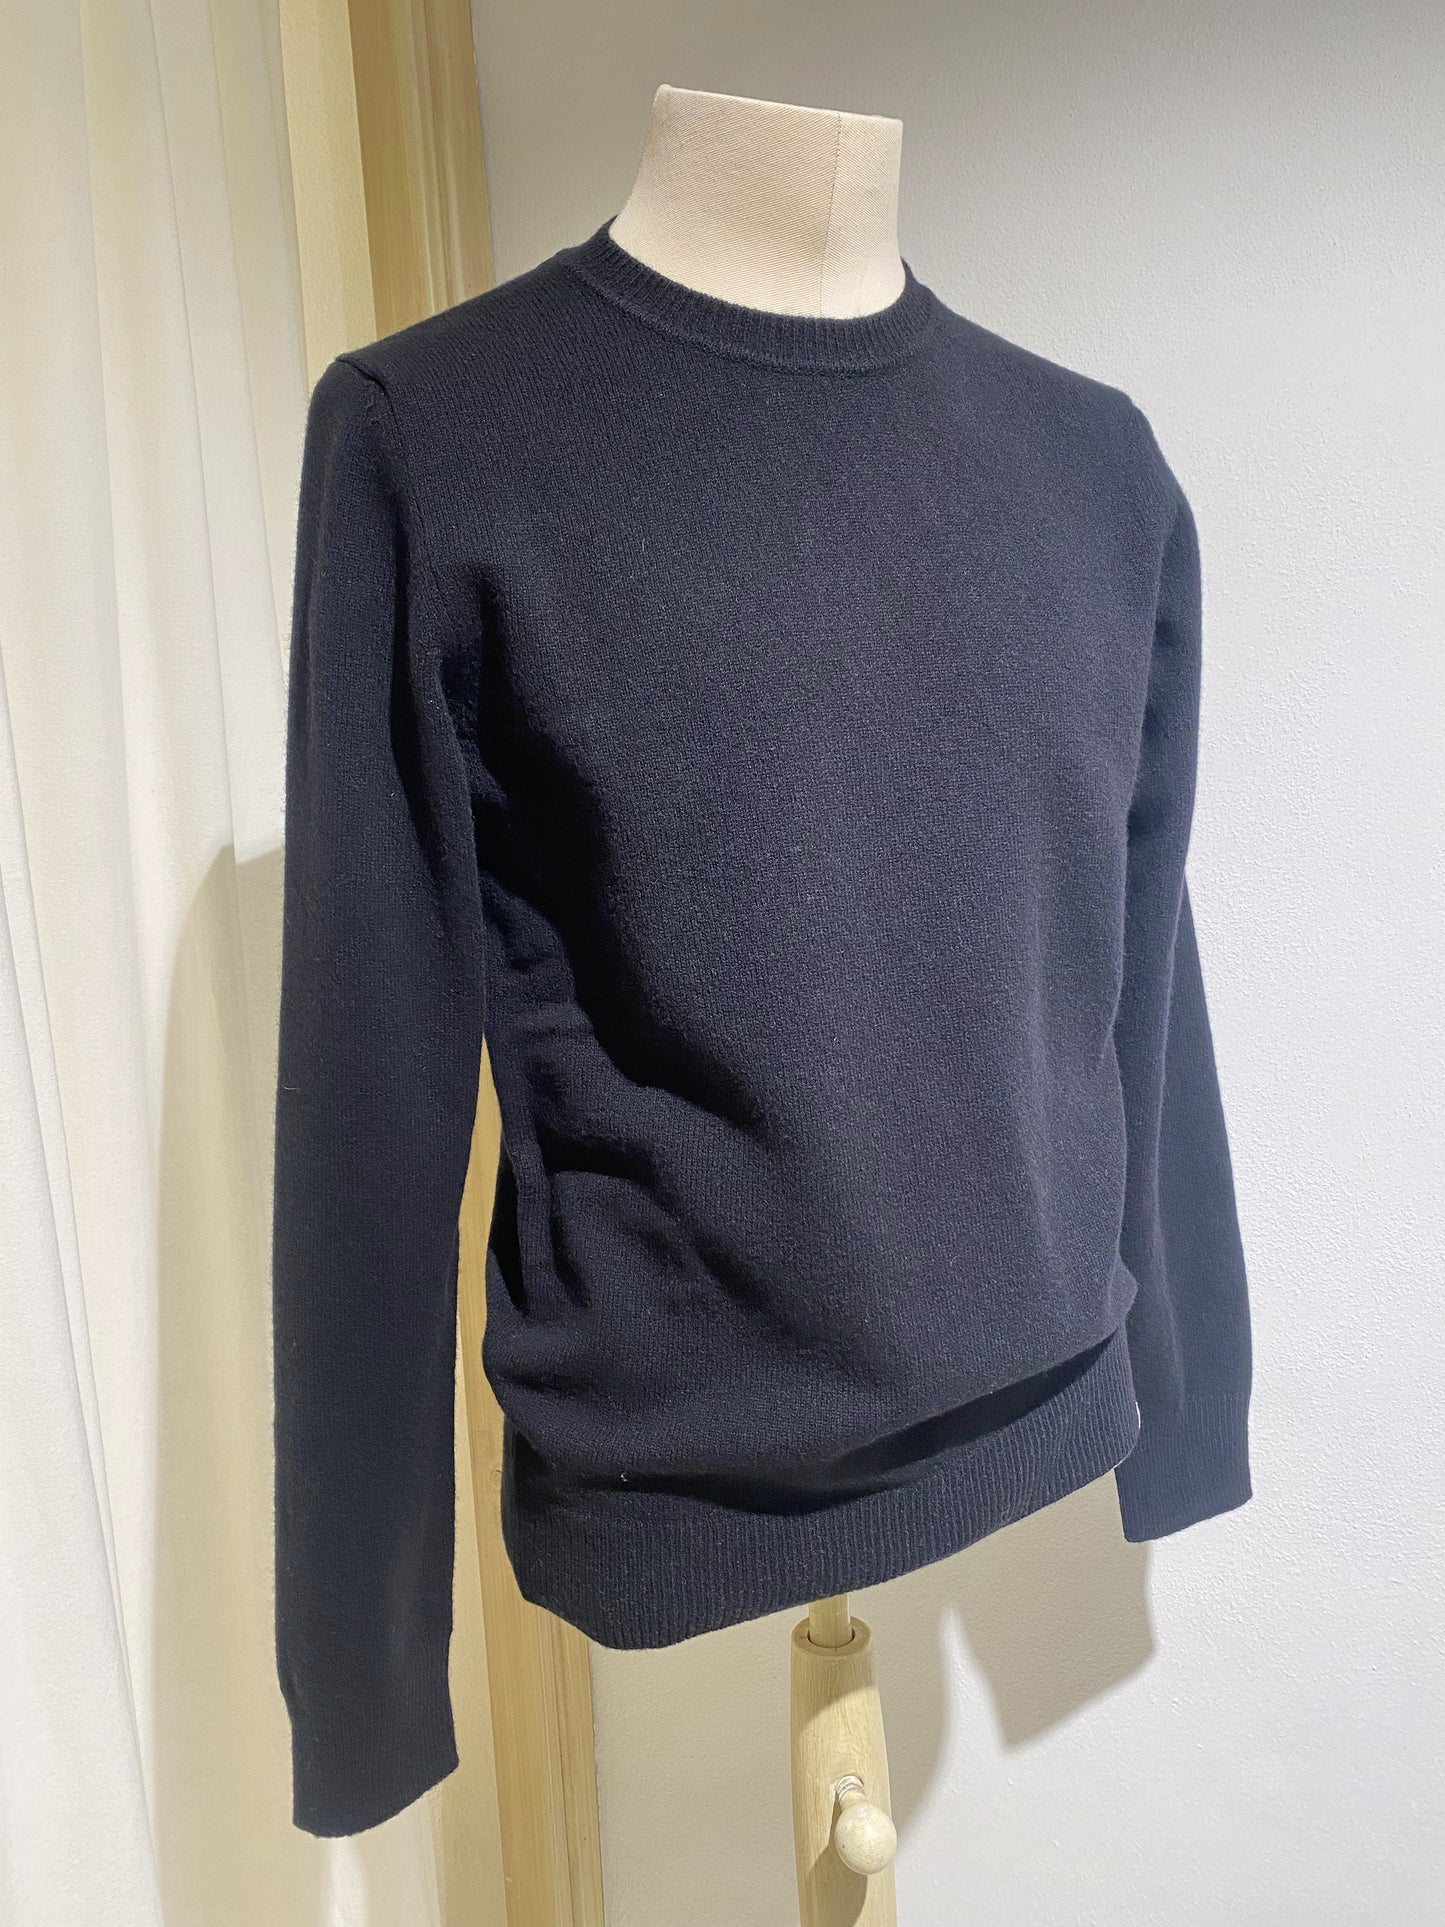 M SIGFRED MERINO LAMBSWOOL SWEATER - NORSE PROJECTS - BLACK